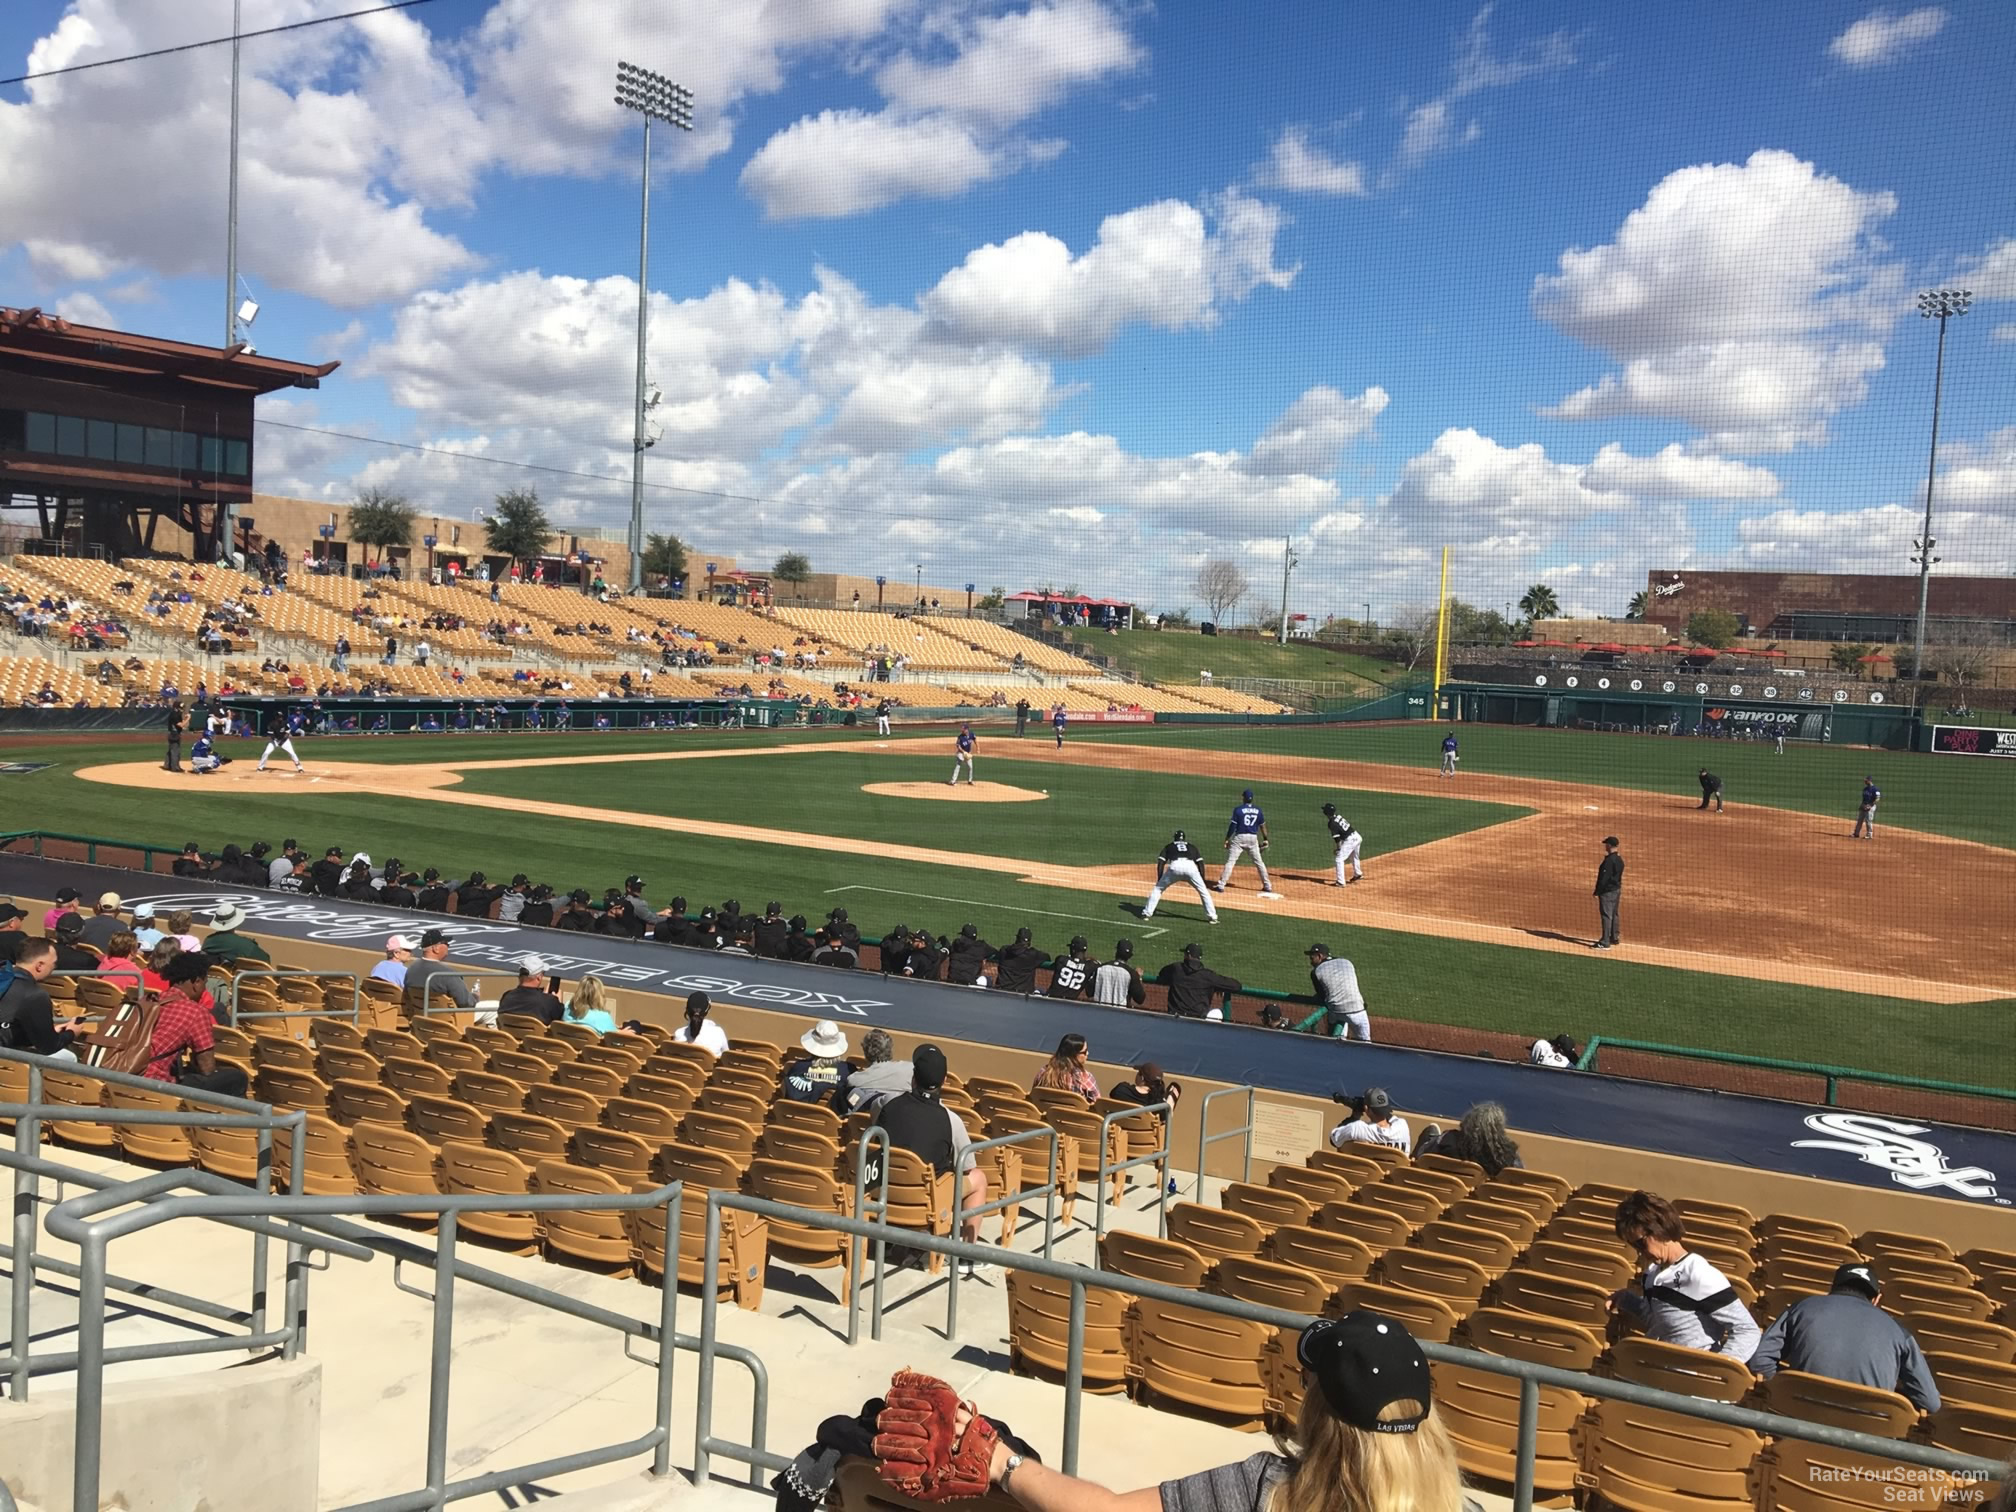 section 106, row 5 seat view  - camelback ranch